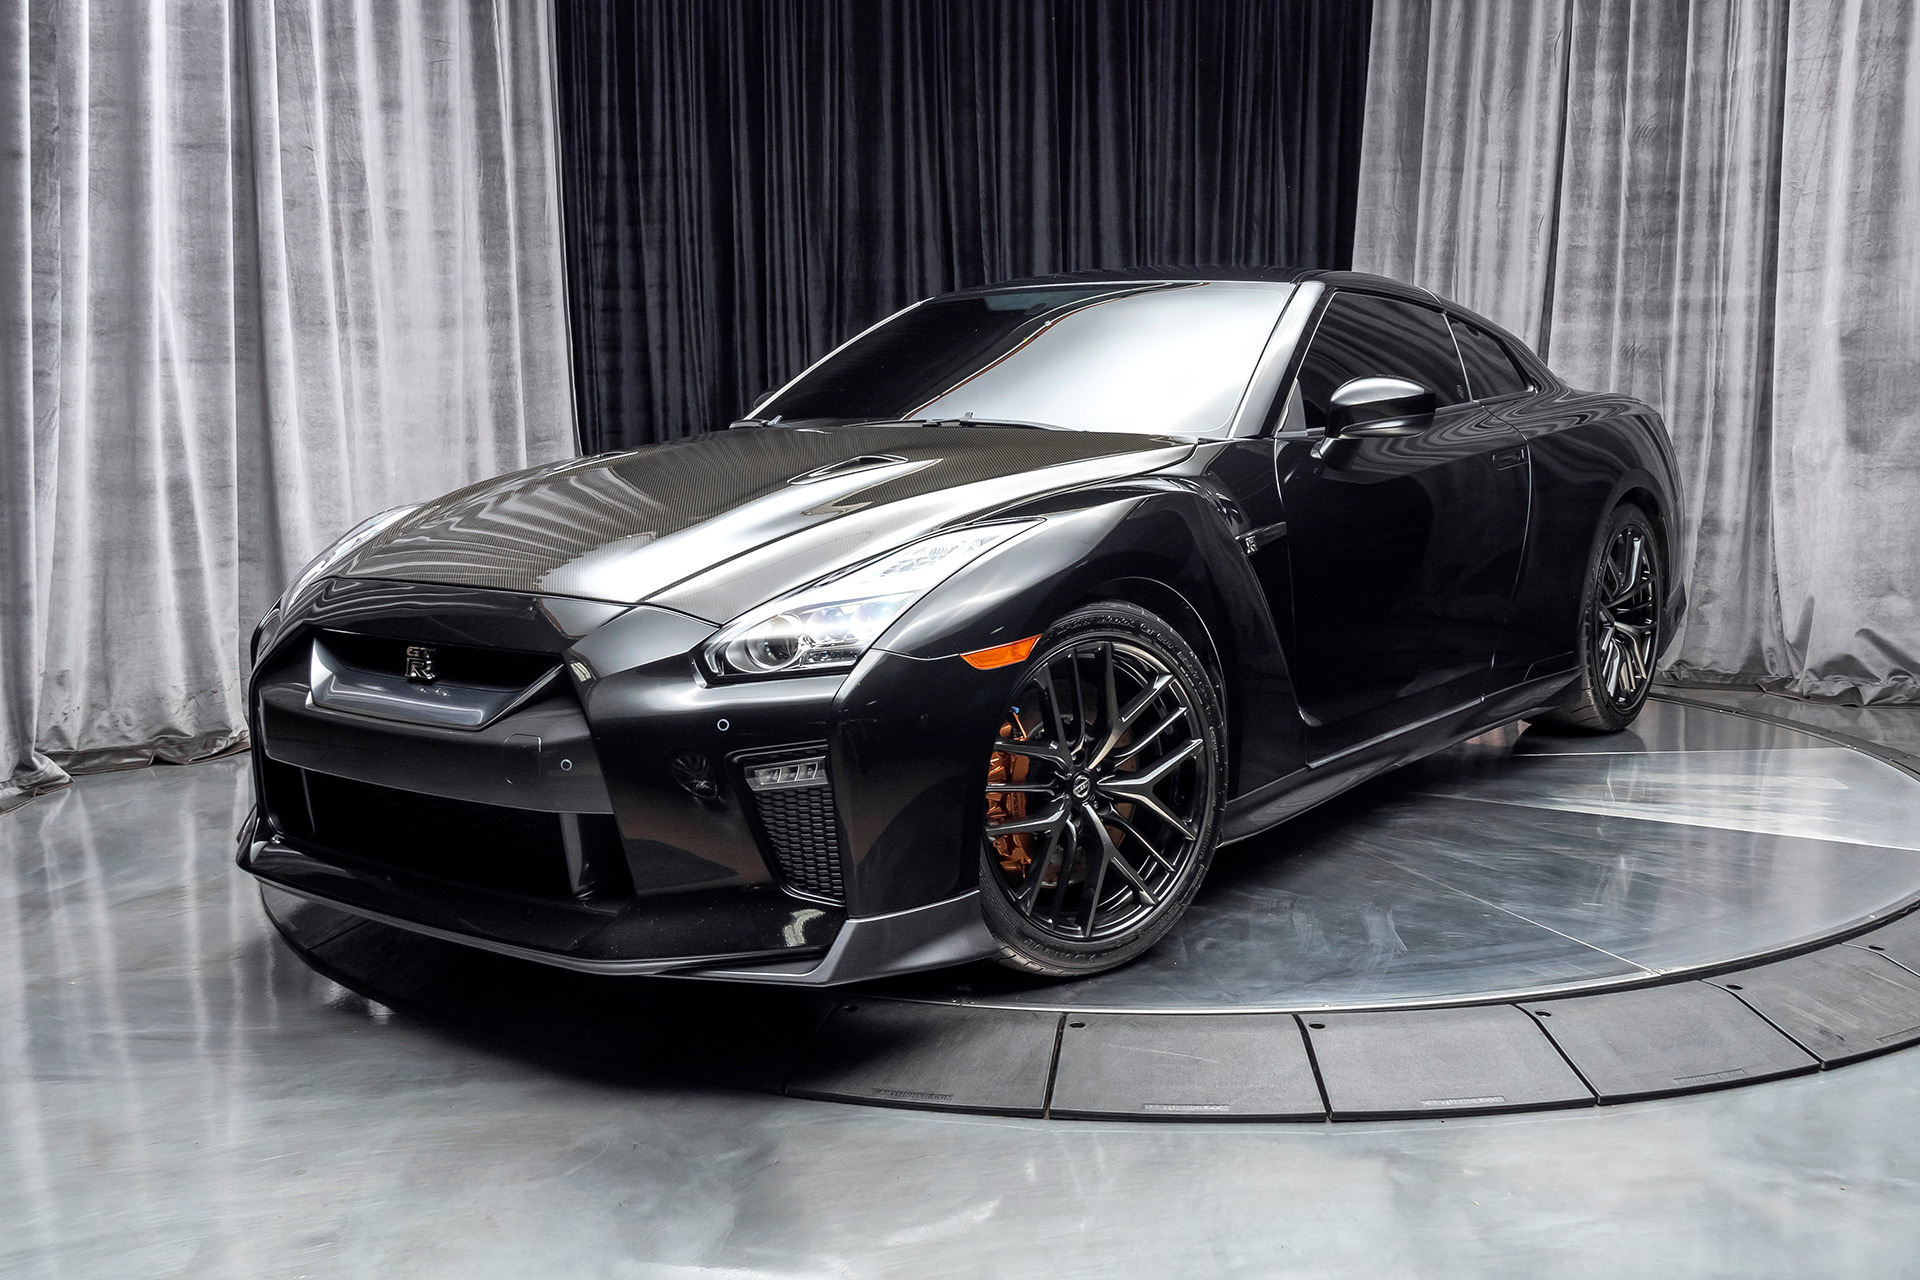 Used-2017-Nissan-GT-R-Premium-Coupe-FULL-BOLT-ON-650WHP-Carbon-Fiber-Upgrades